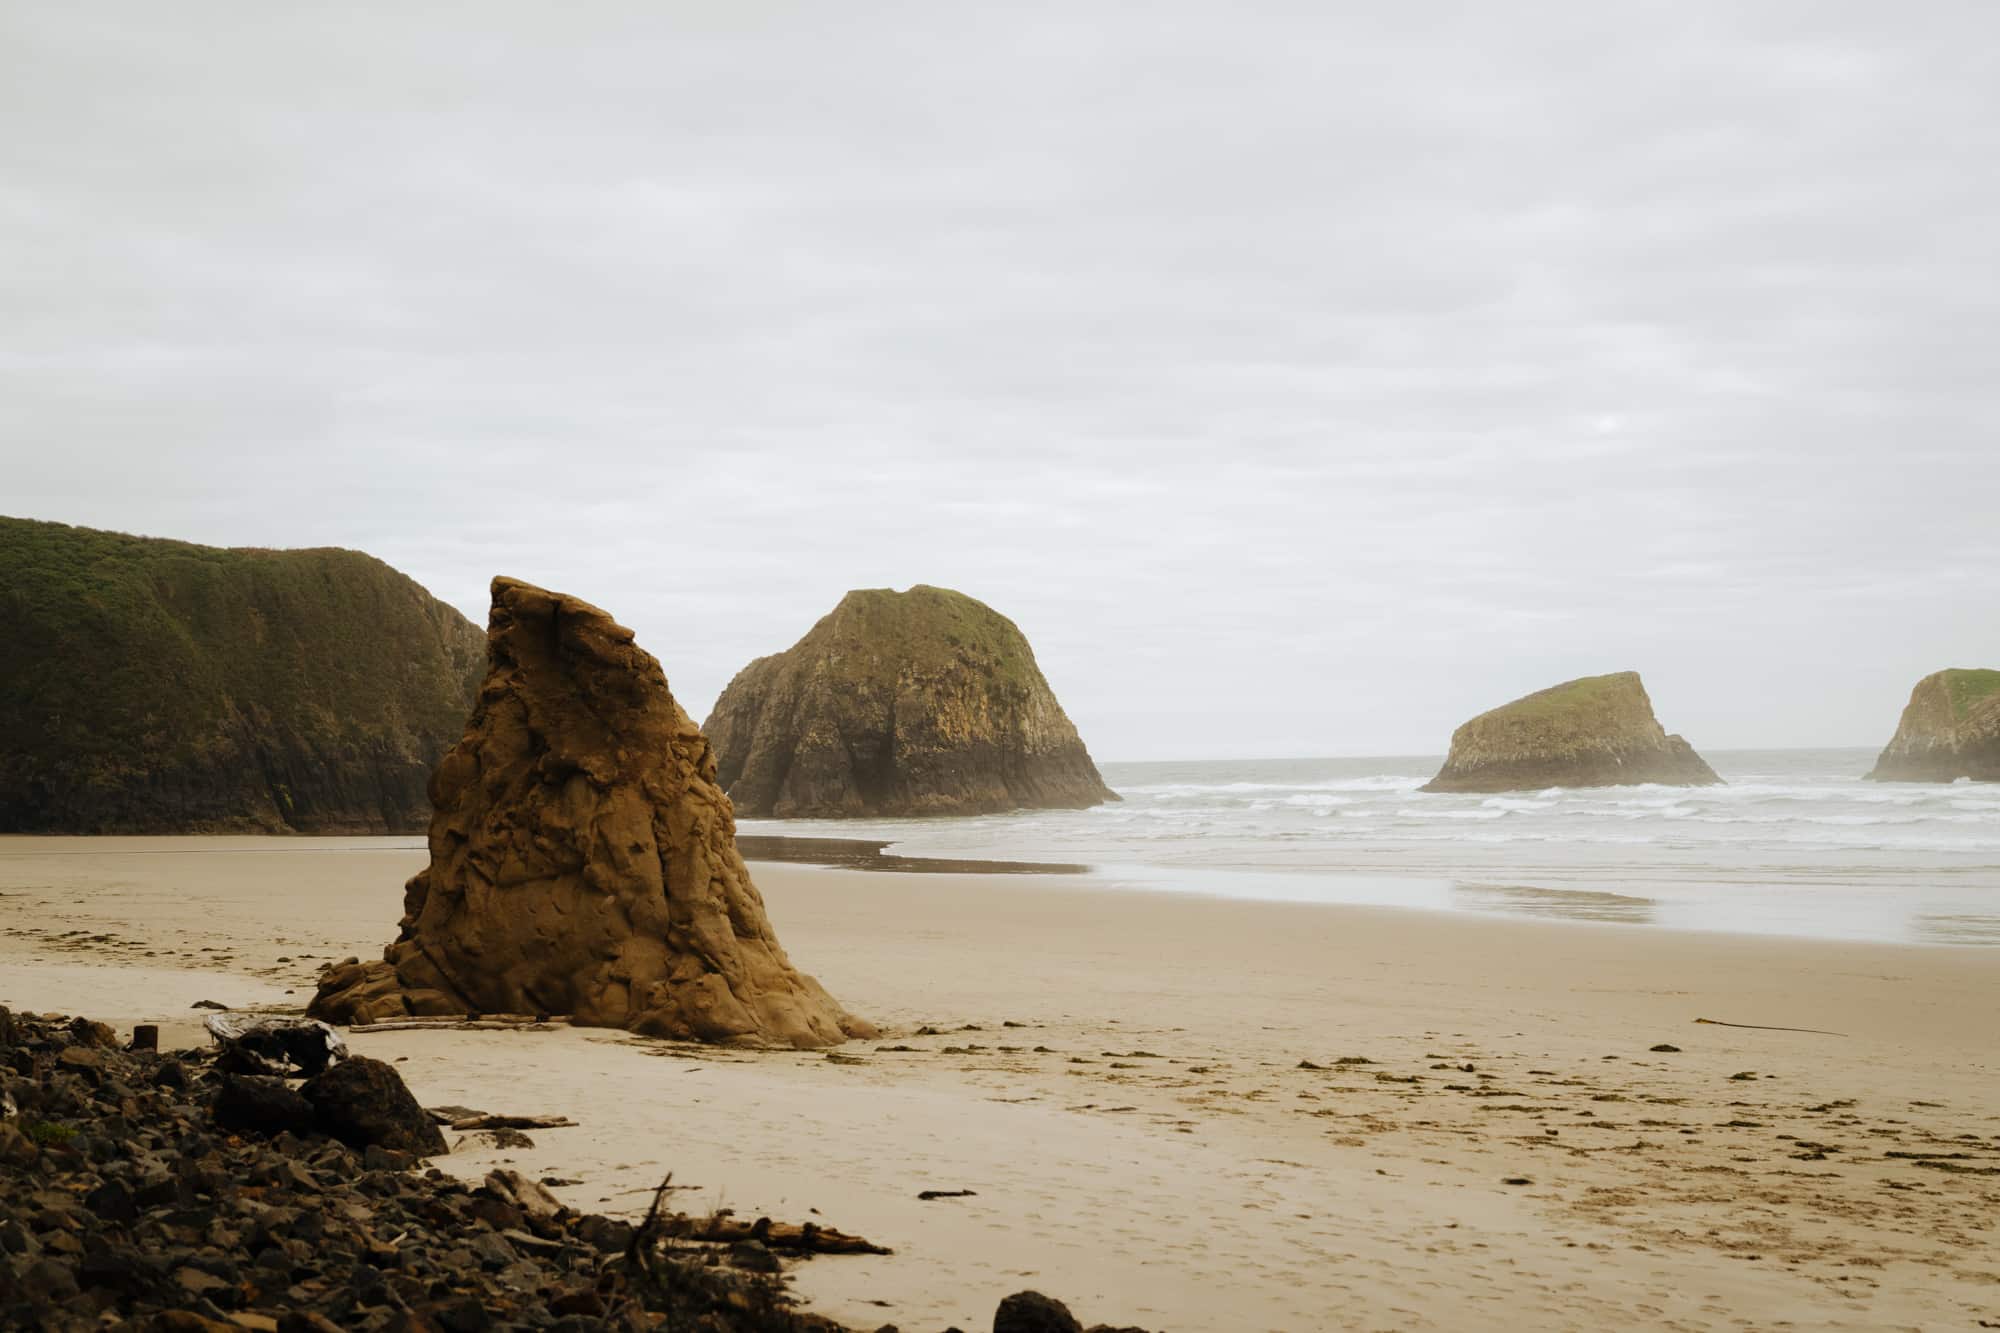 Sea stacks and rock formations at Crescent beach in Ecola State Park in Oregon.